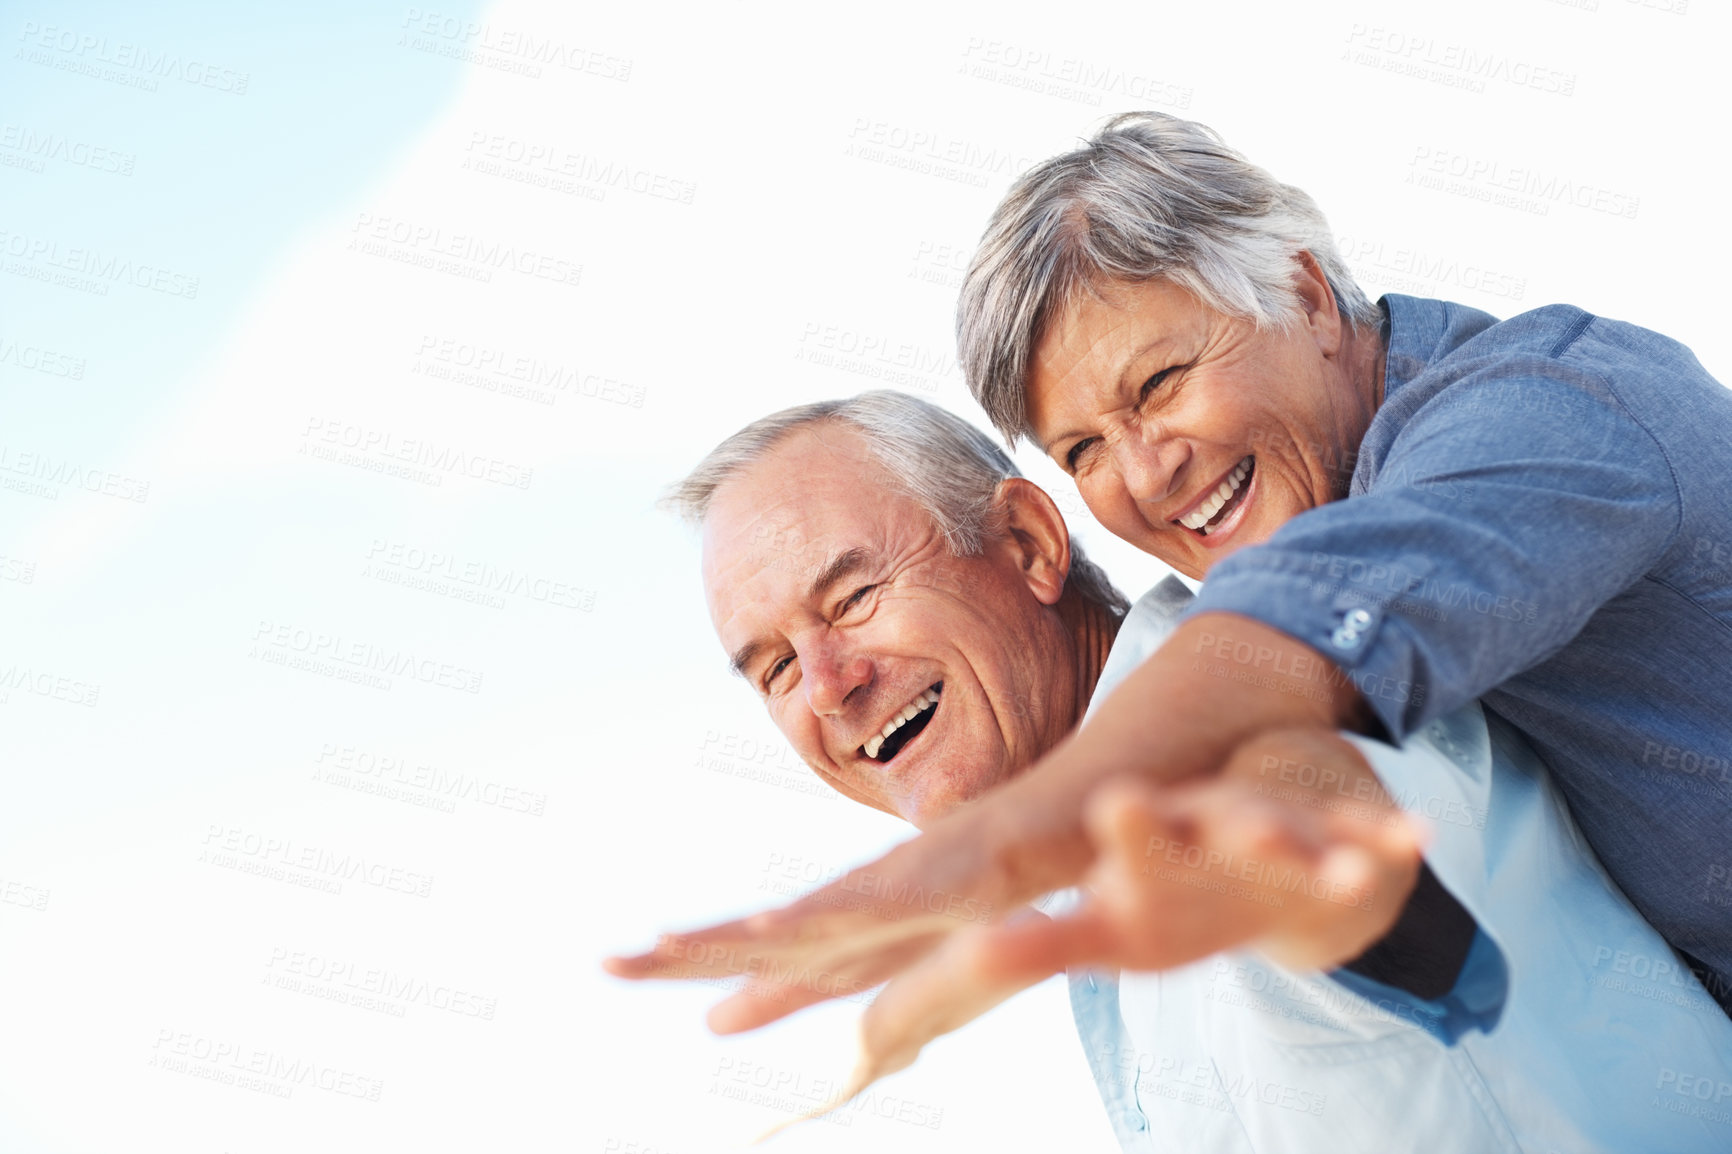 Buy stock photo Cheerful man piggybacking mature woman outdoors with hands outstretched